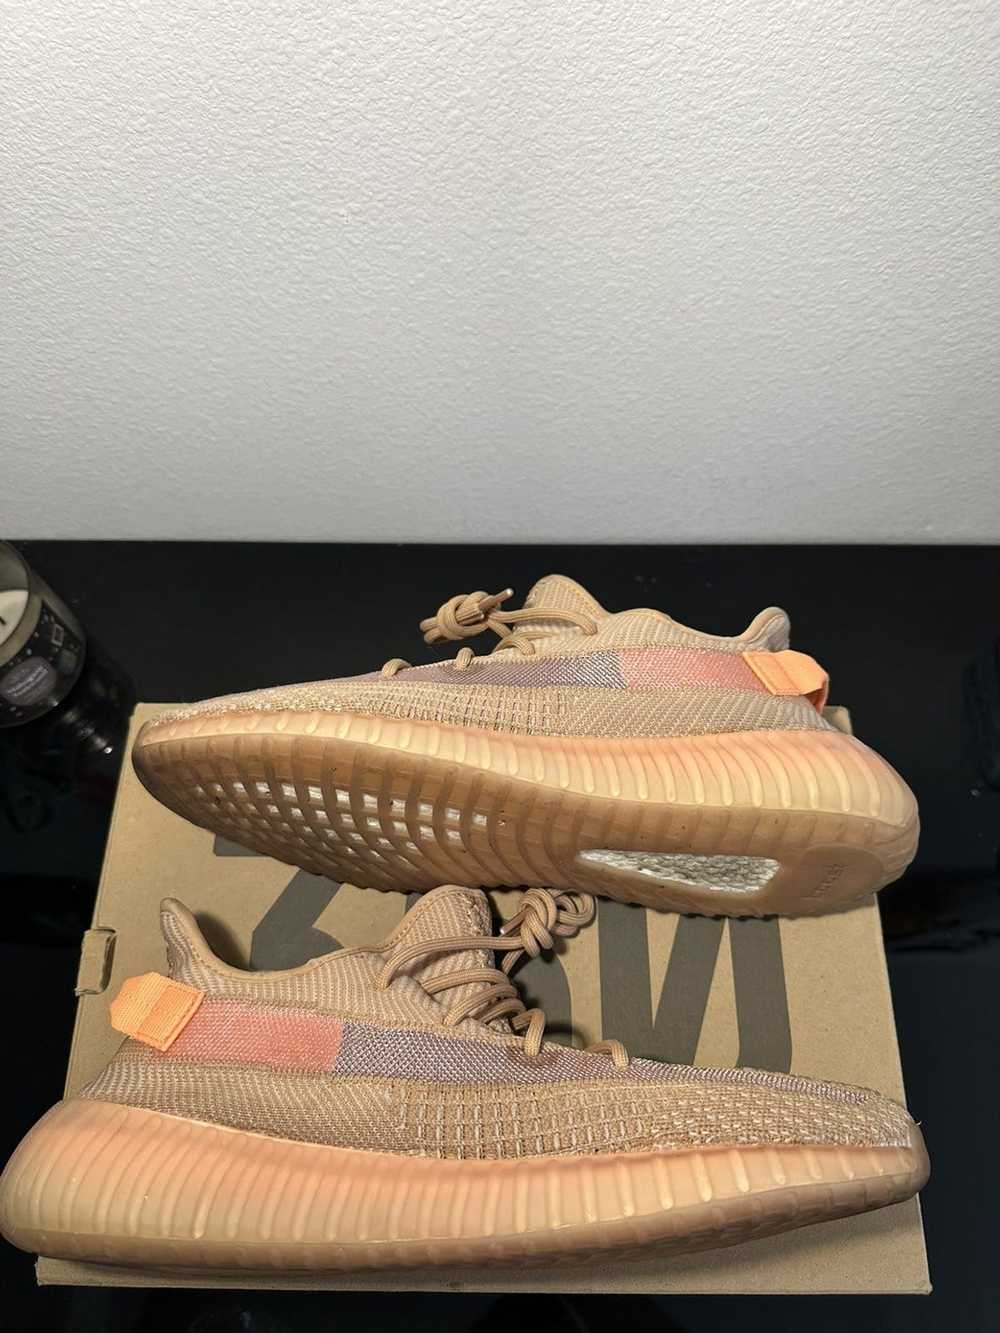 Adidas Yeezy boost 350 clay size 13 - image 3